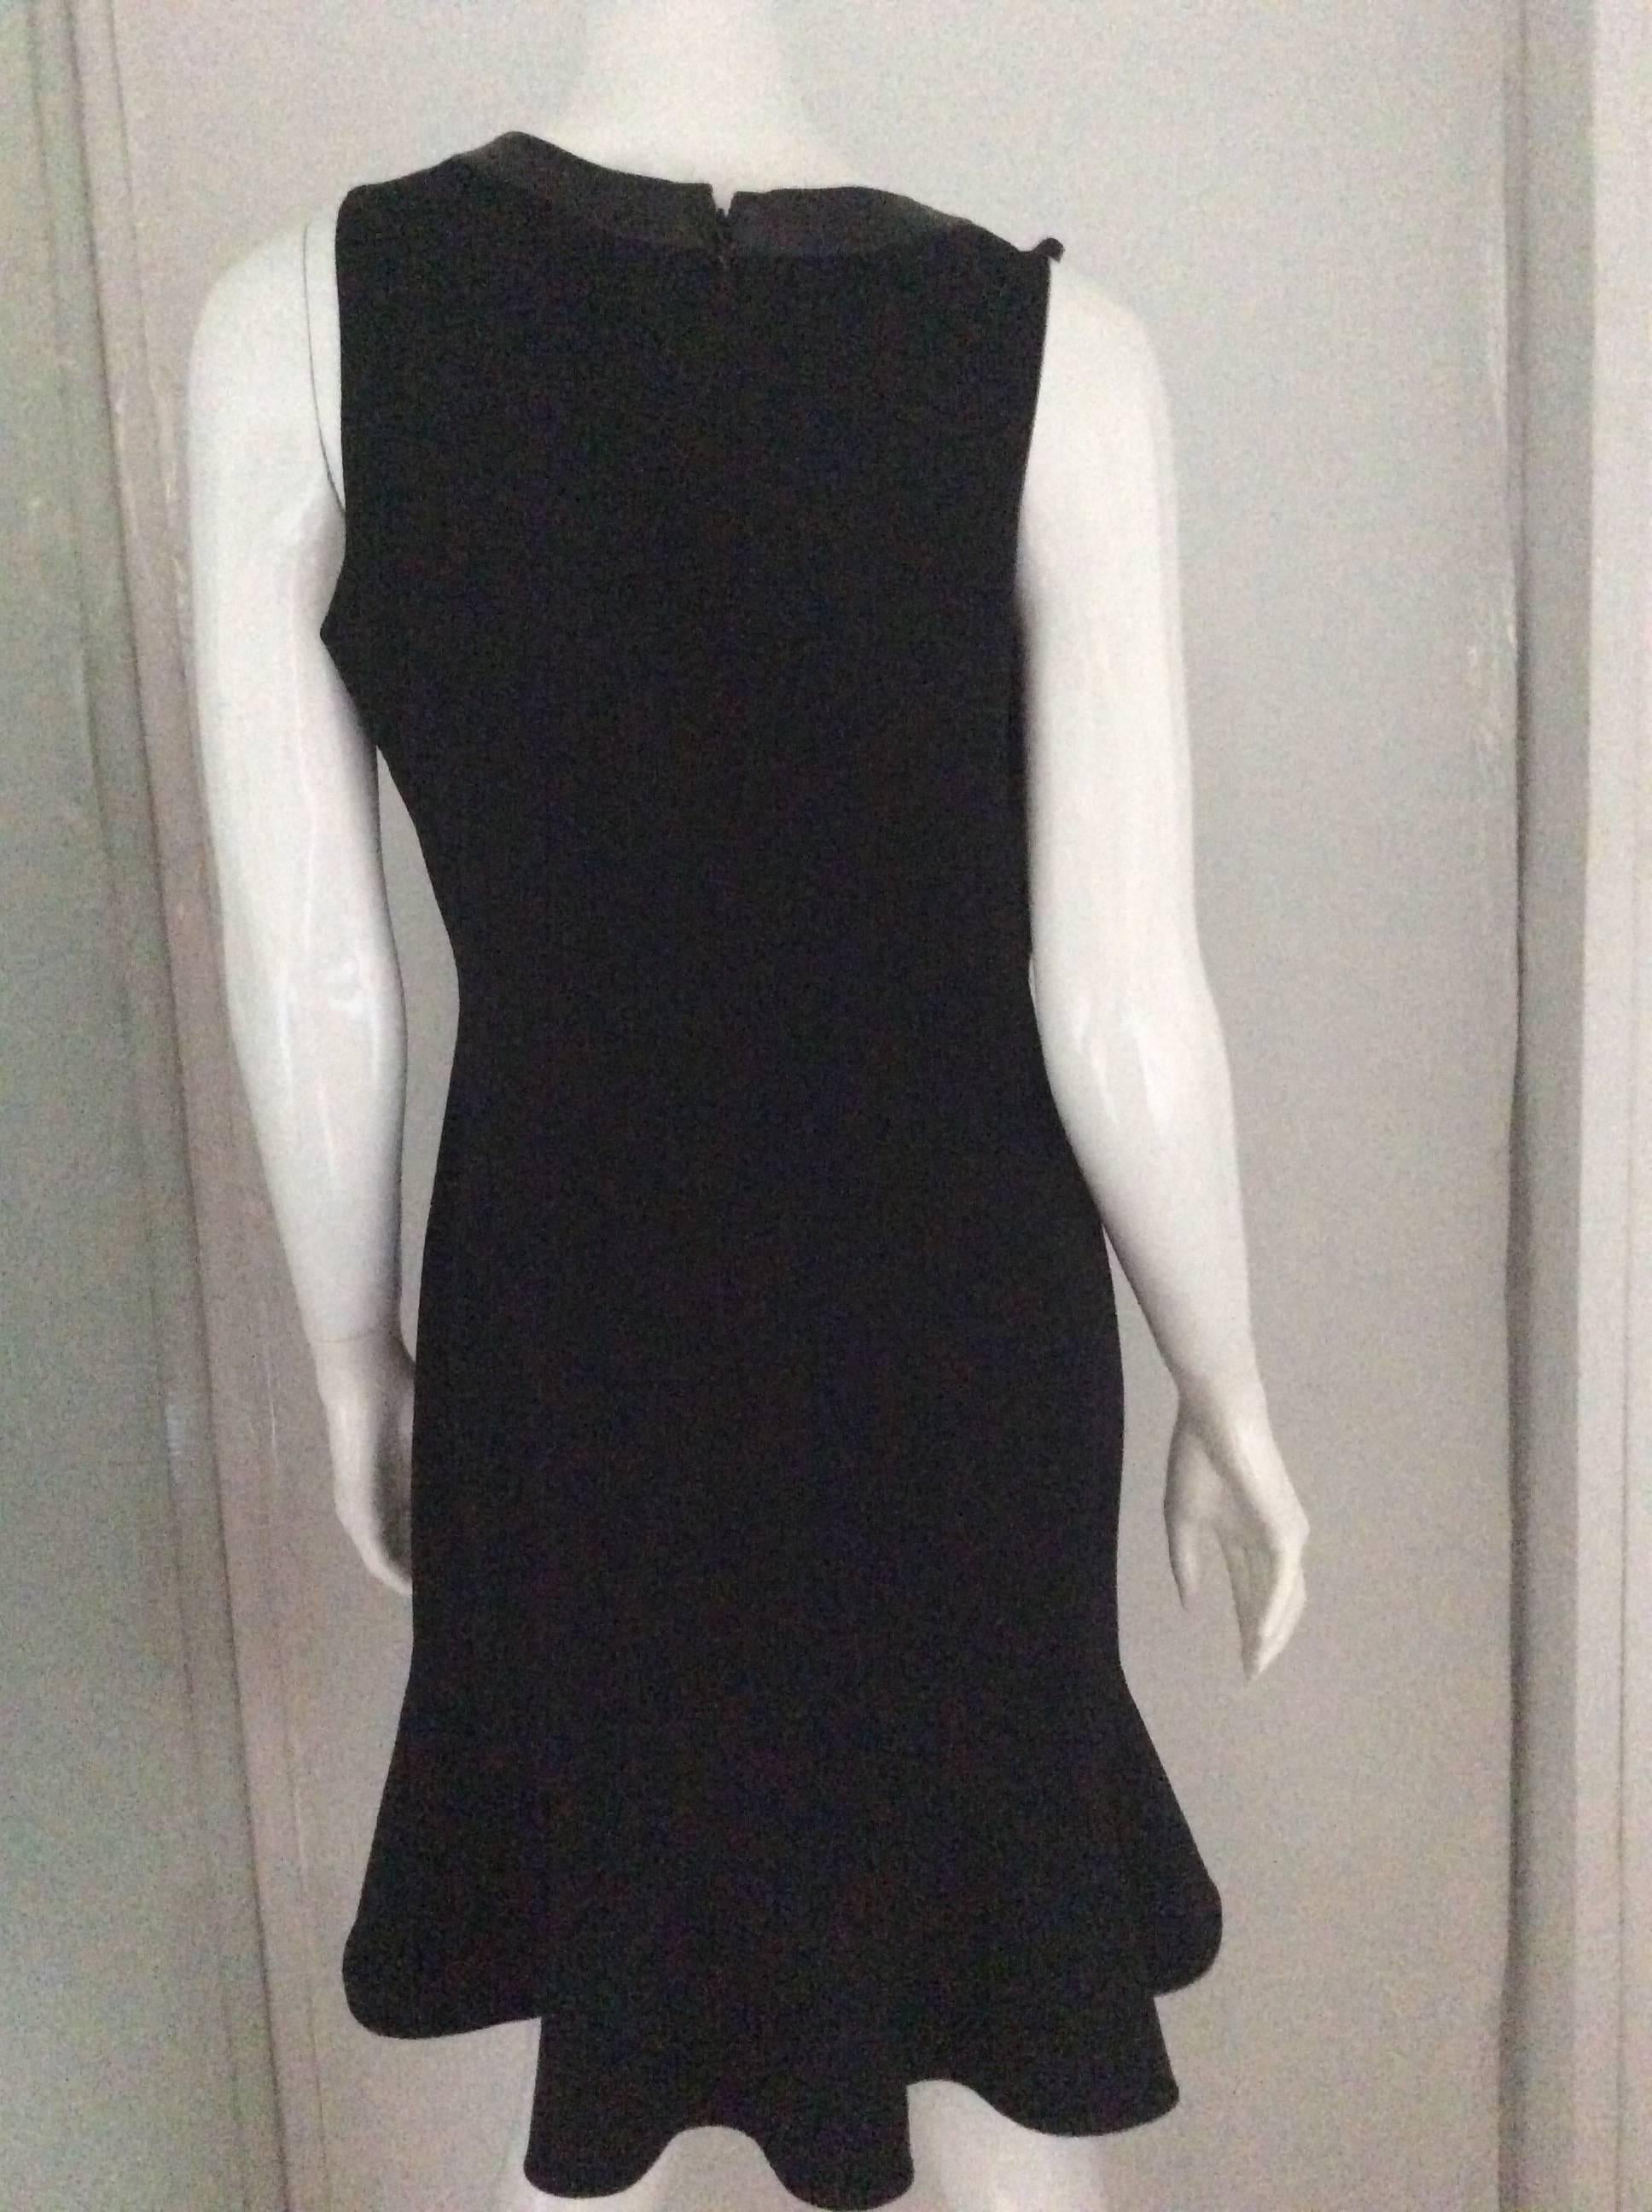 This dress just might be your perfect little black dress for all occasions. The sleeveless dress has a 1 inch leather trim around the neck and a 6.5 inch flounce at the bottom of the dress. It is a US size 10 (please pay close attention to the